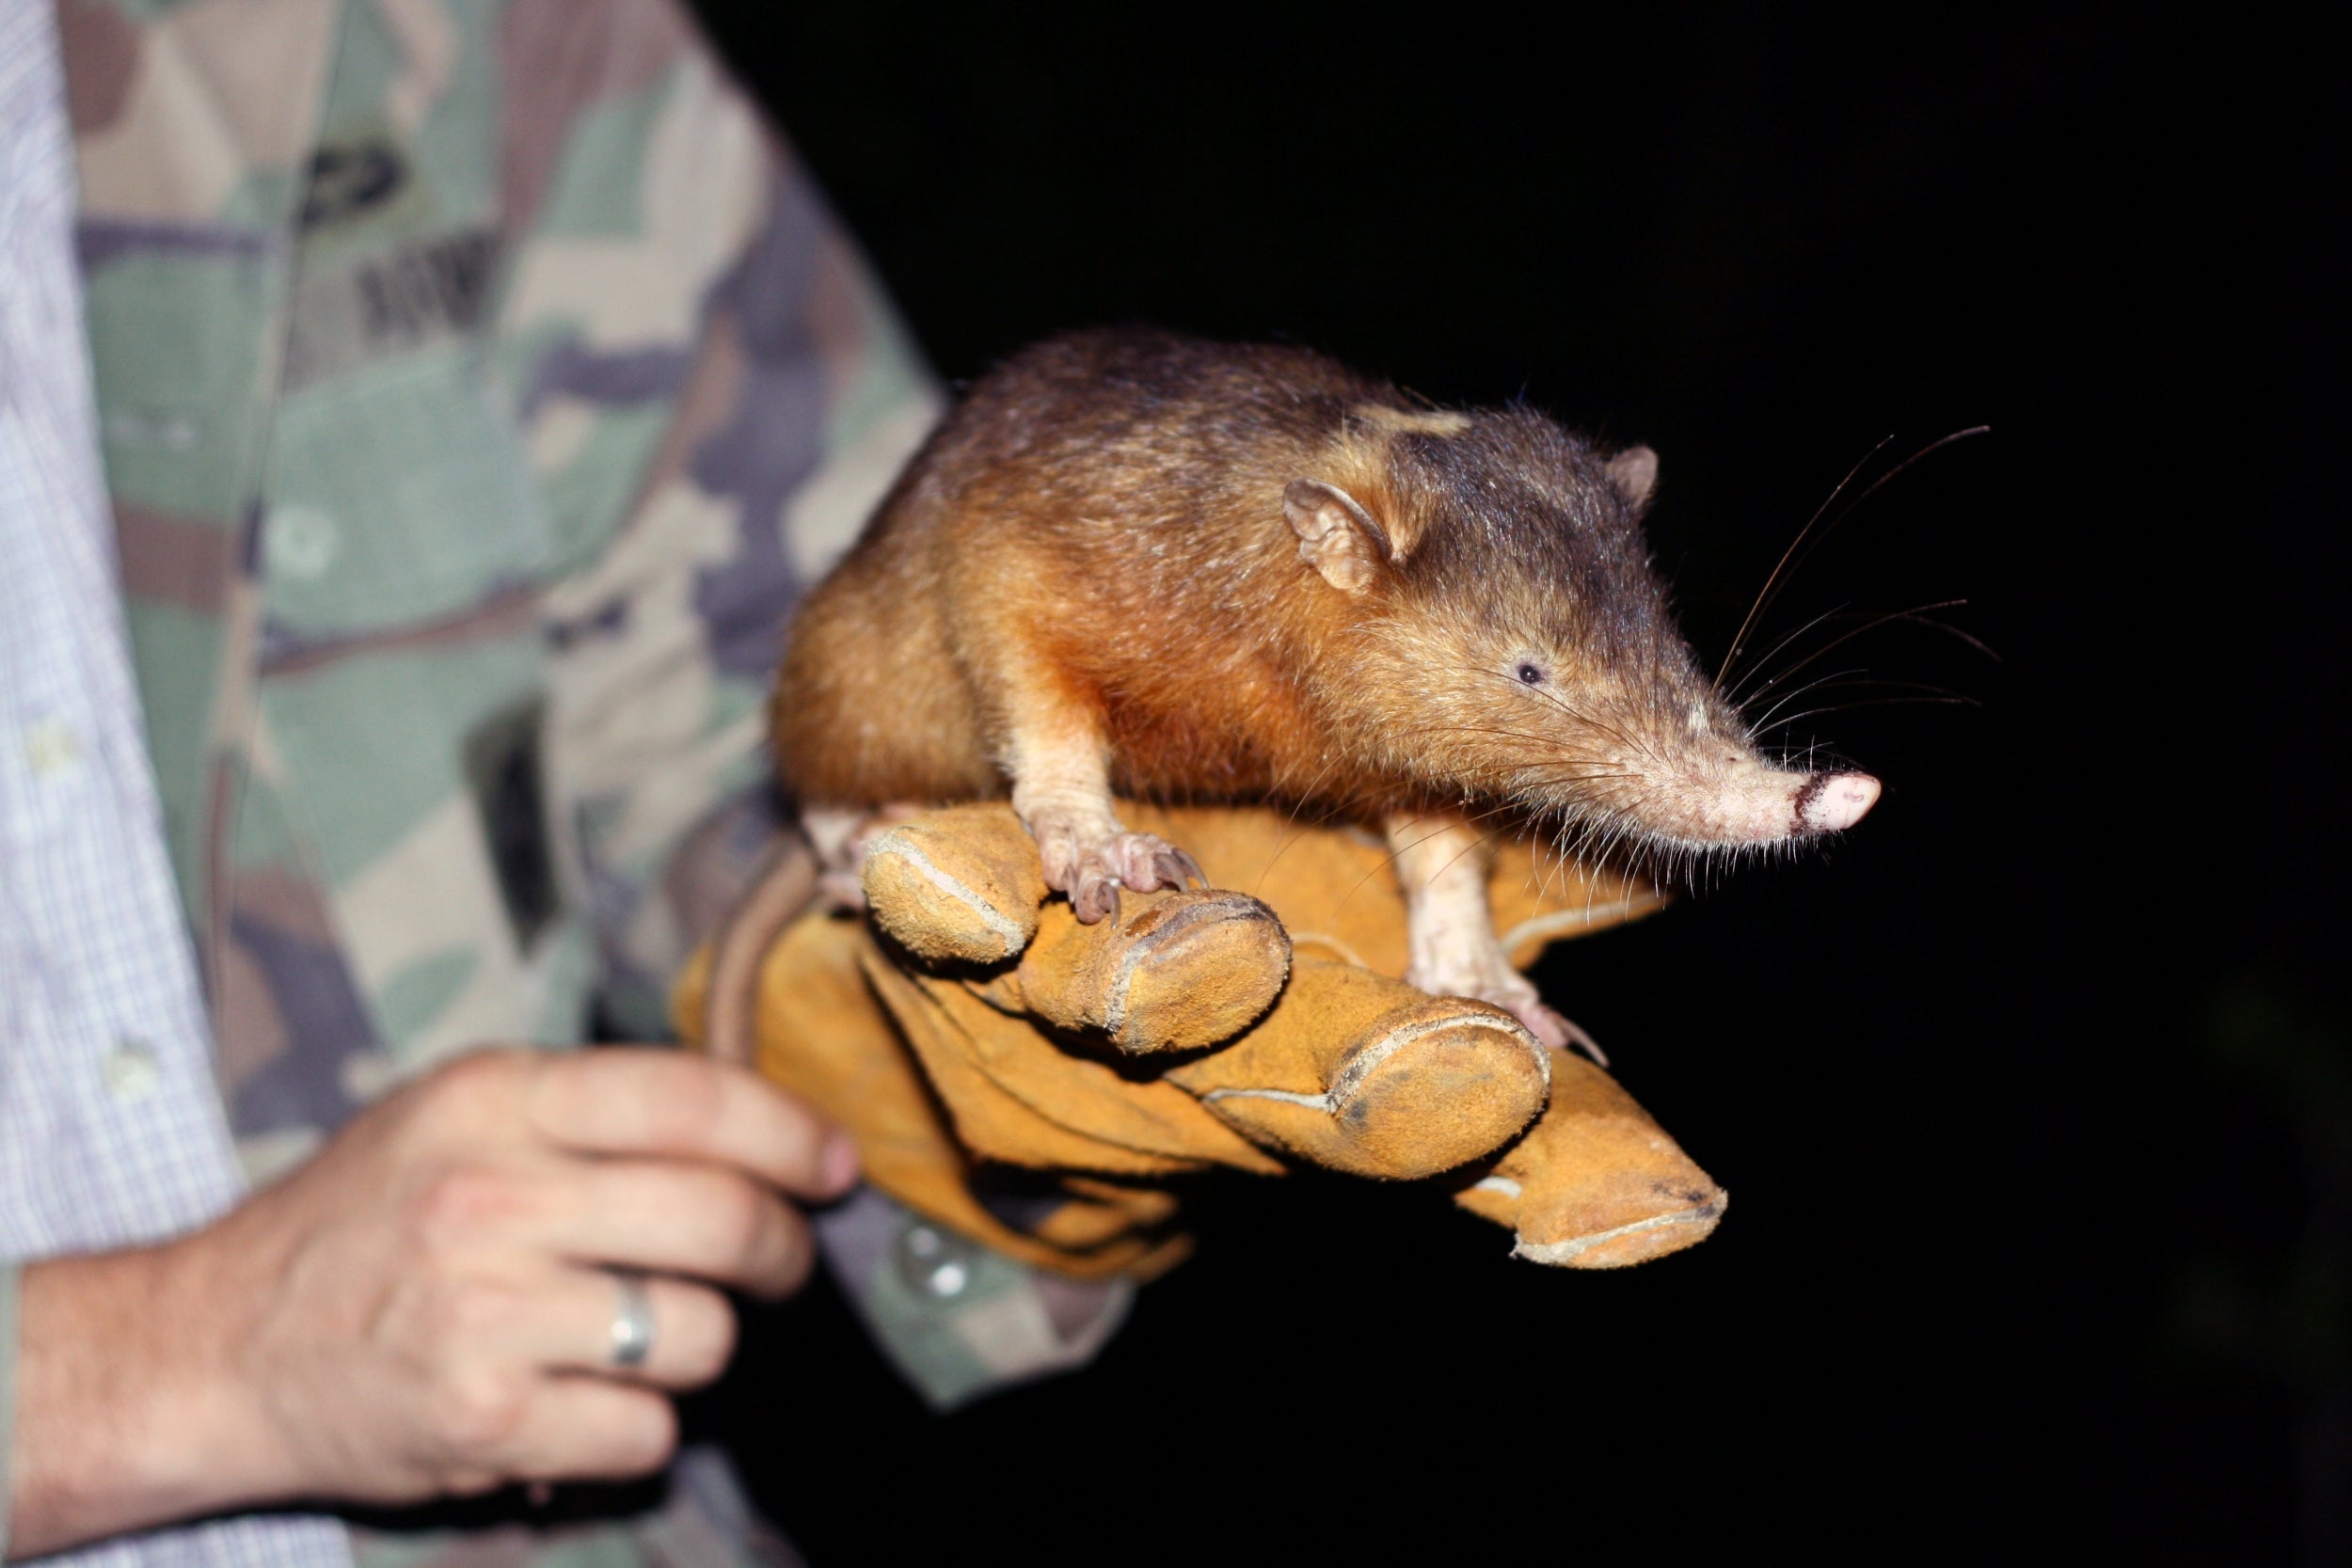 The Hispaniolan solenodon lives in the forests of the Dominican Republic and Haiti